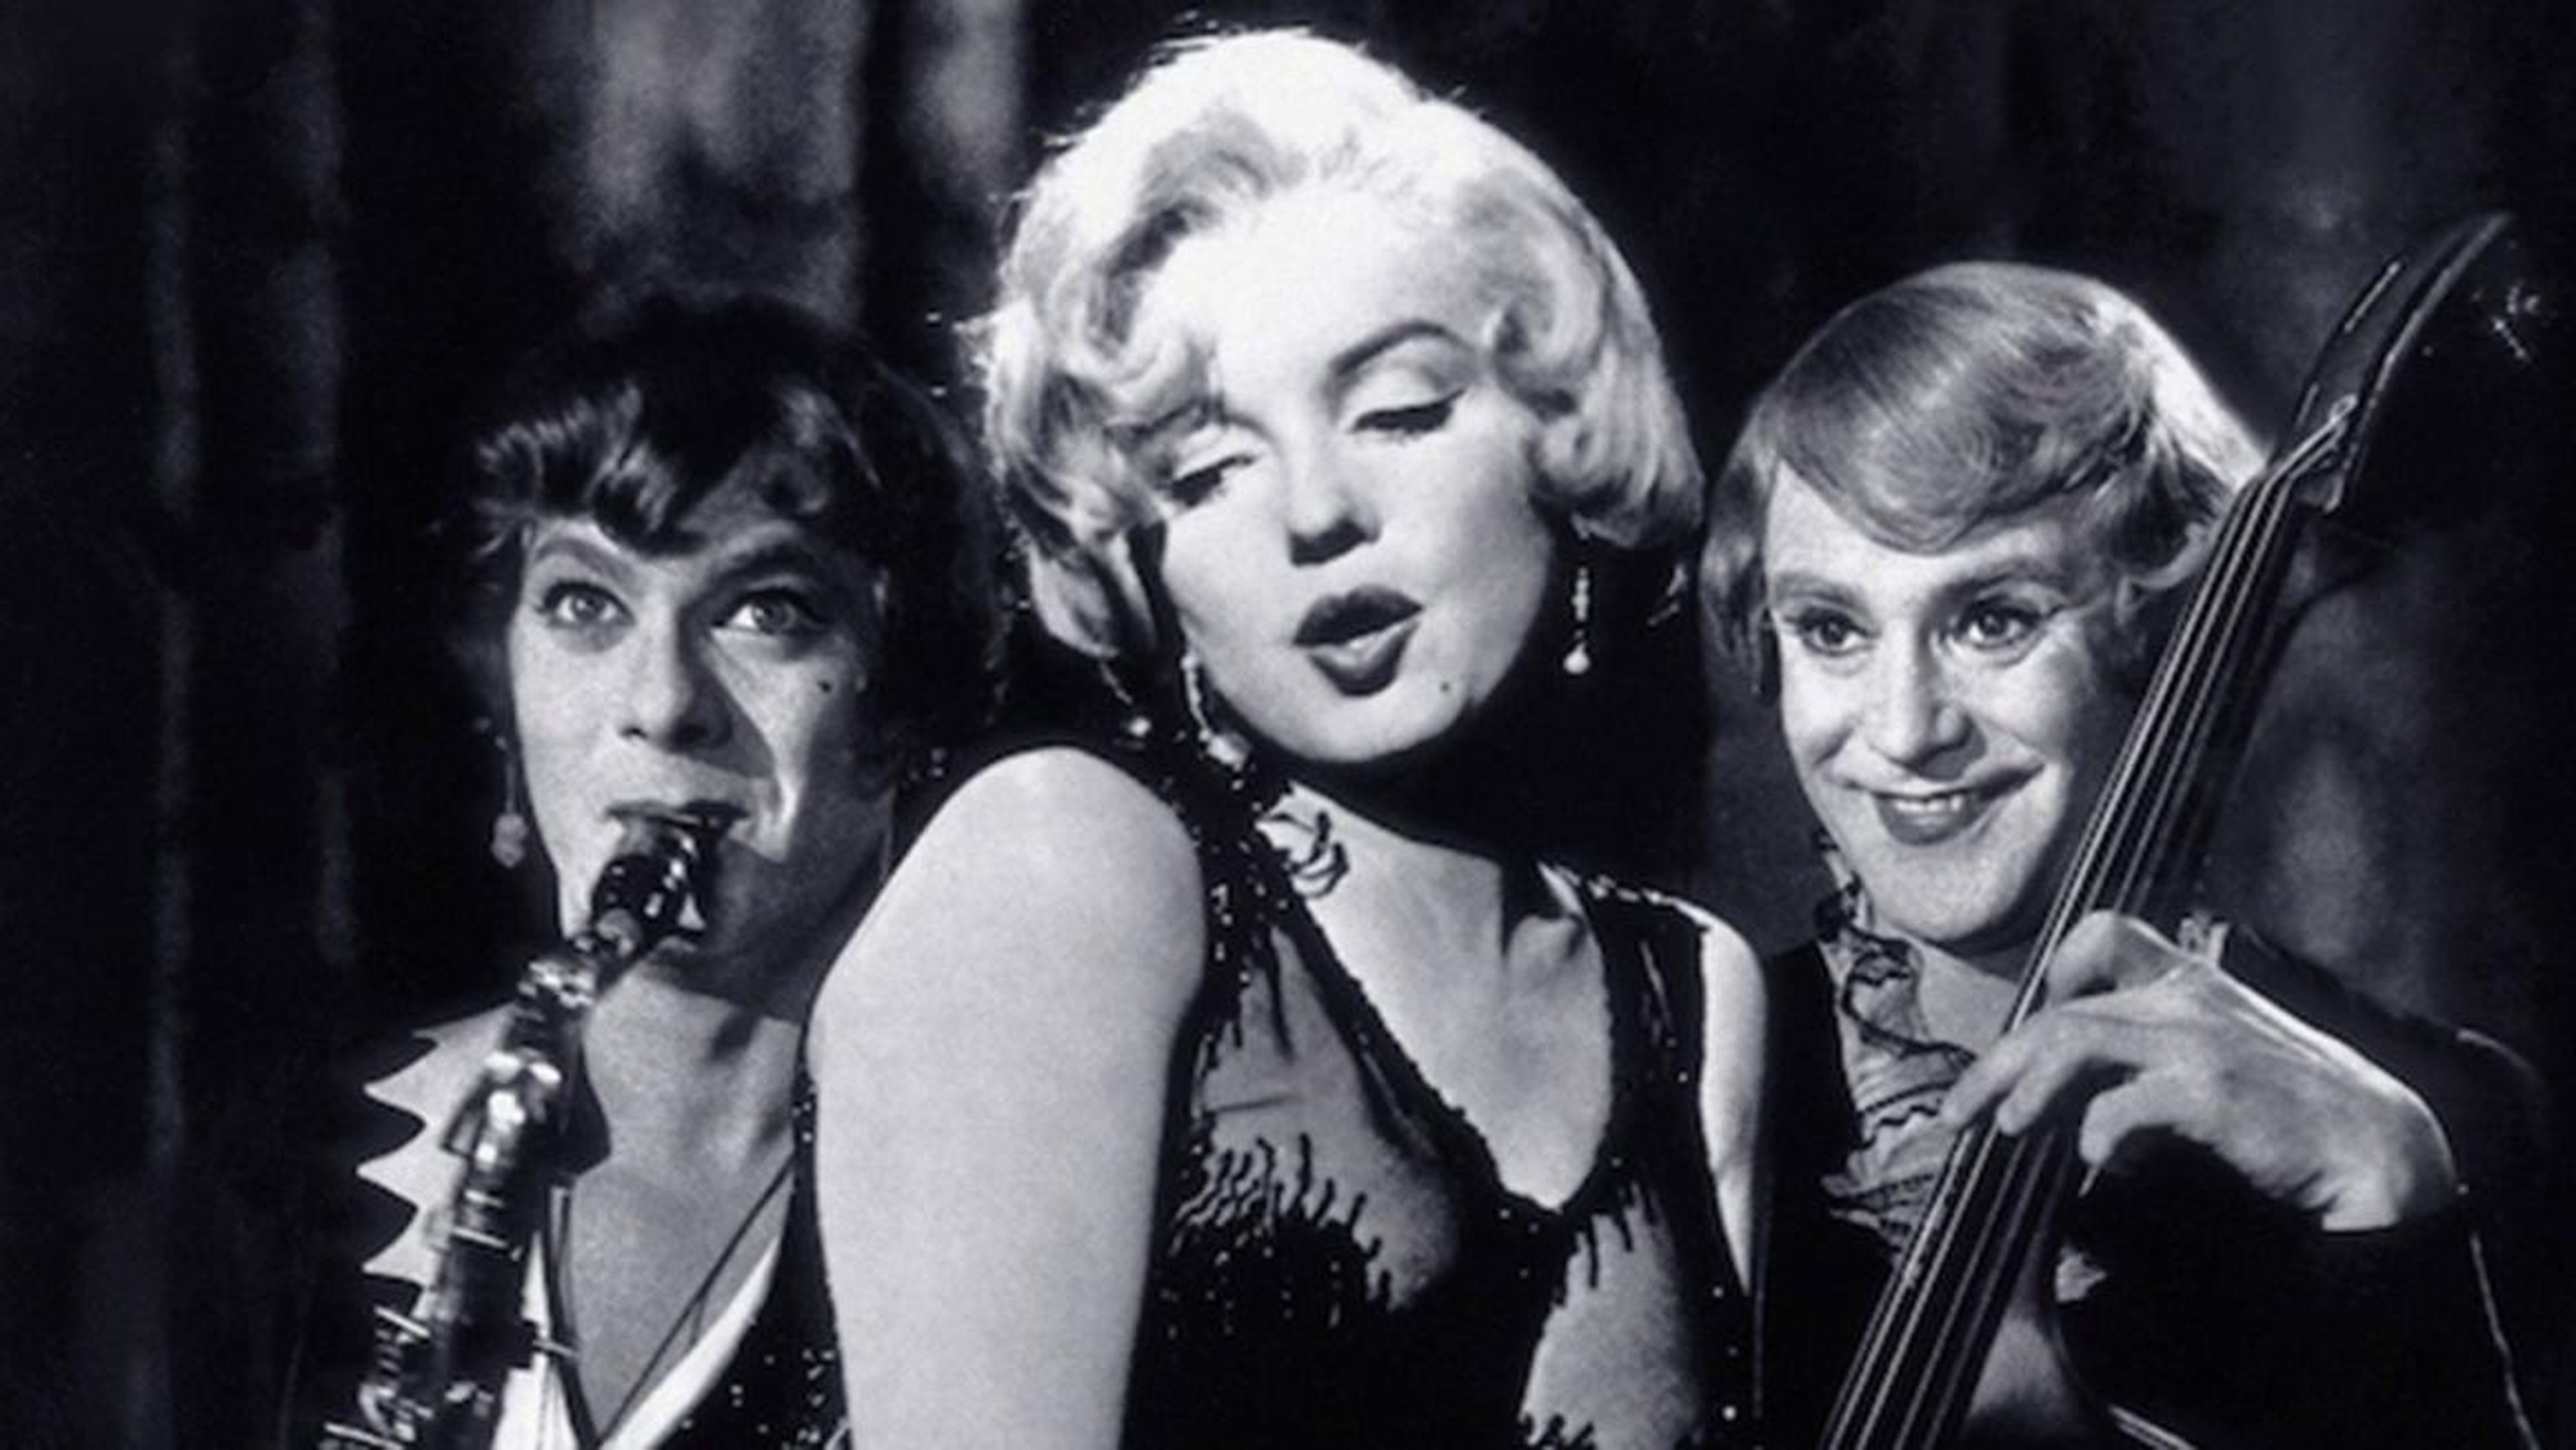 17. "Some Like It Hot" (1959)